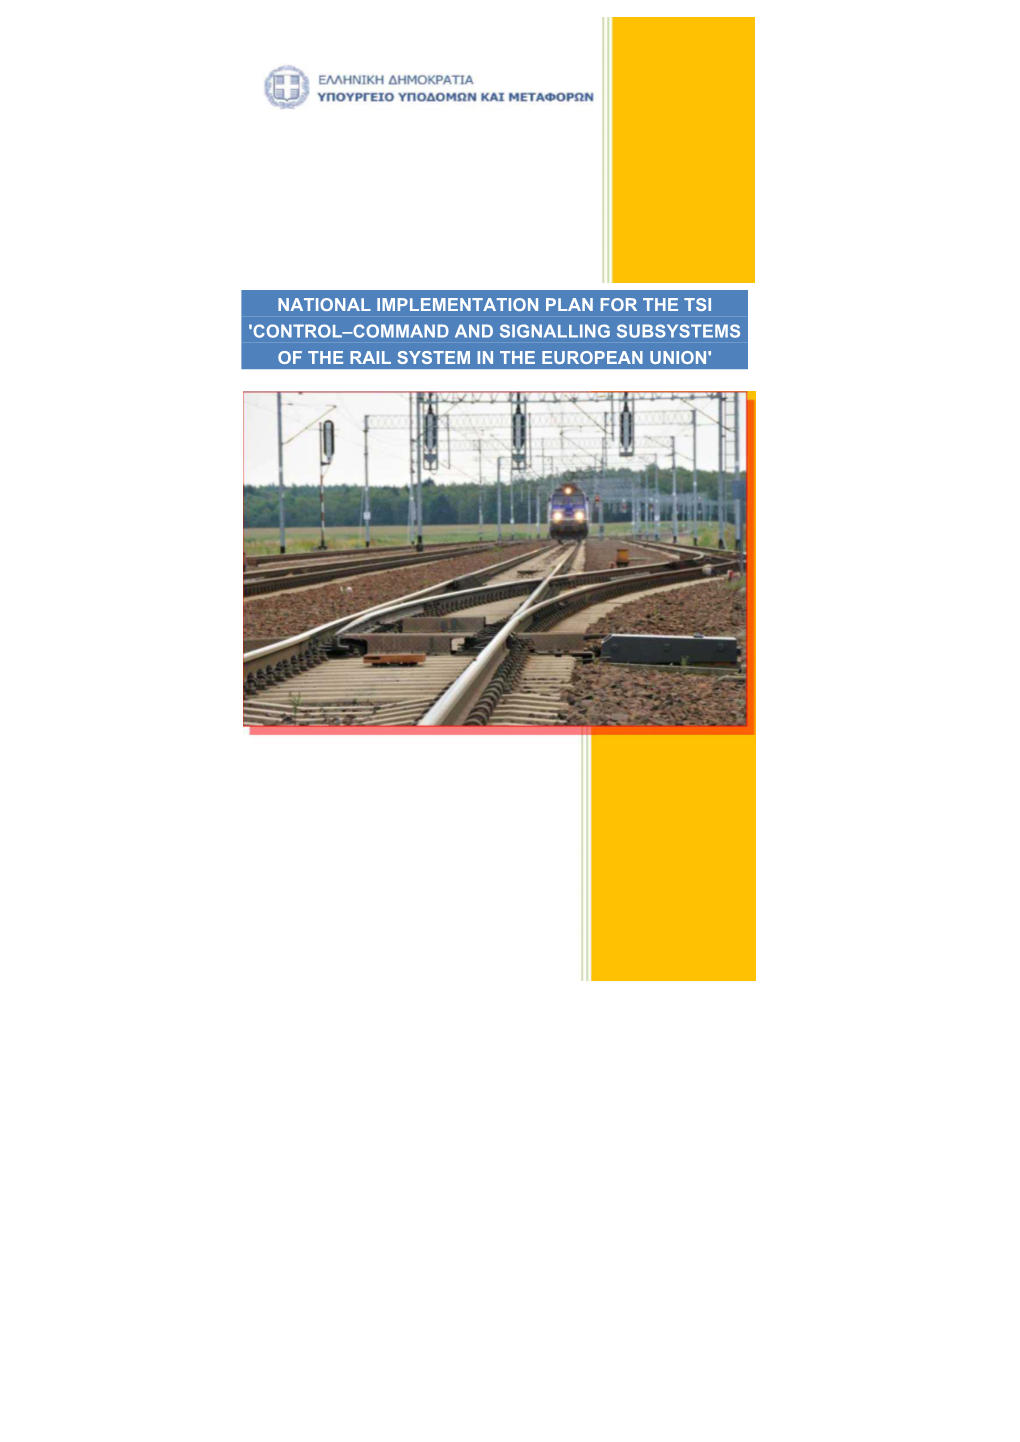 Control–Command and Signalling Subsystems of the Rail System in the European Union'